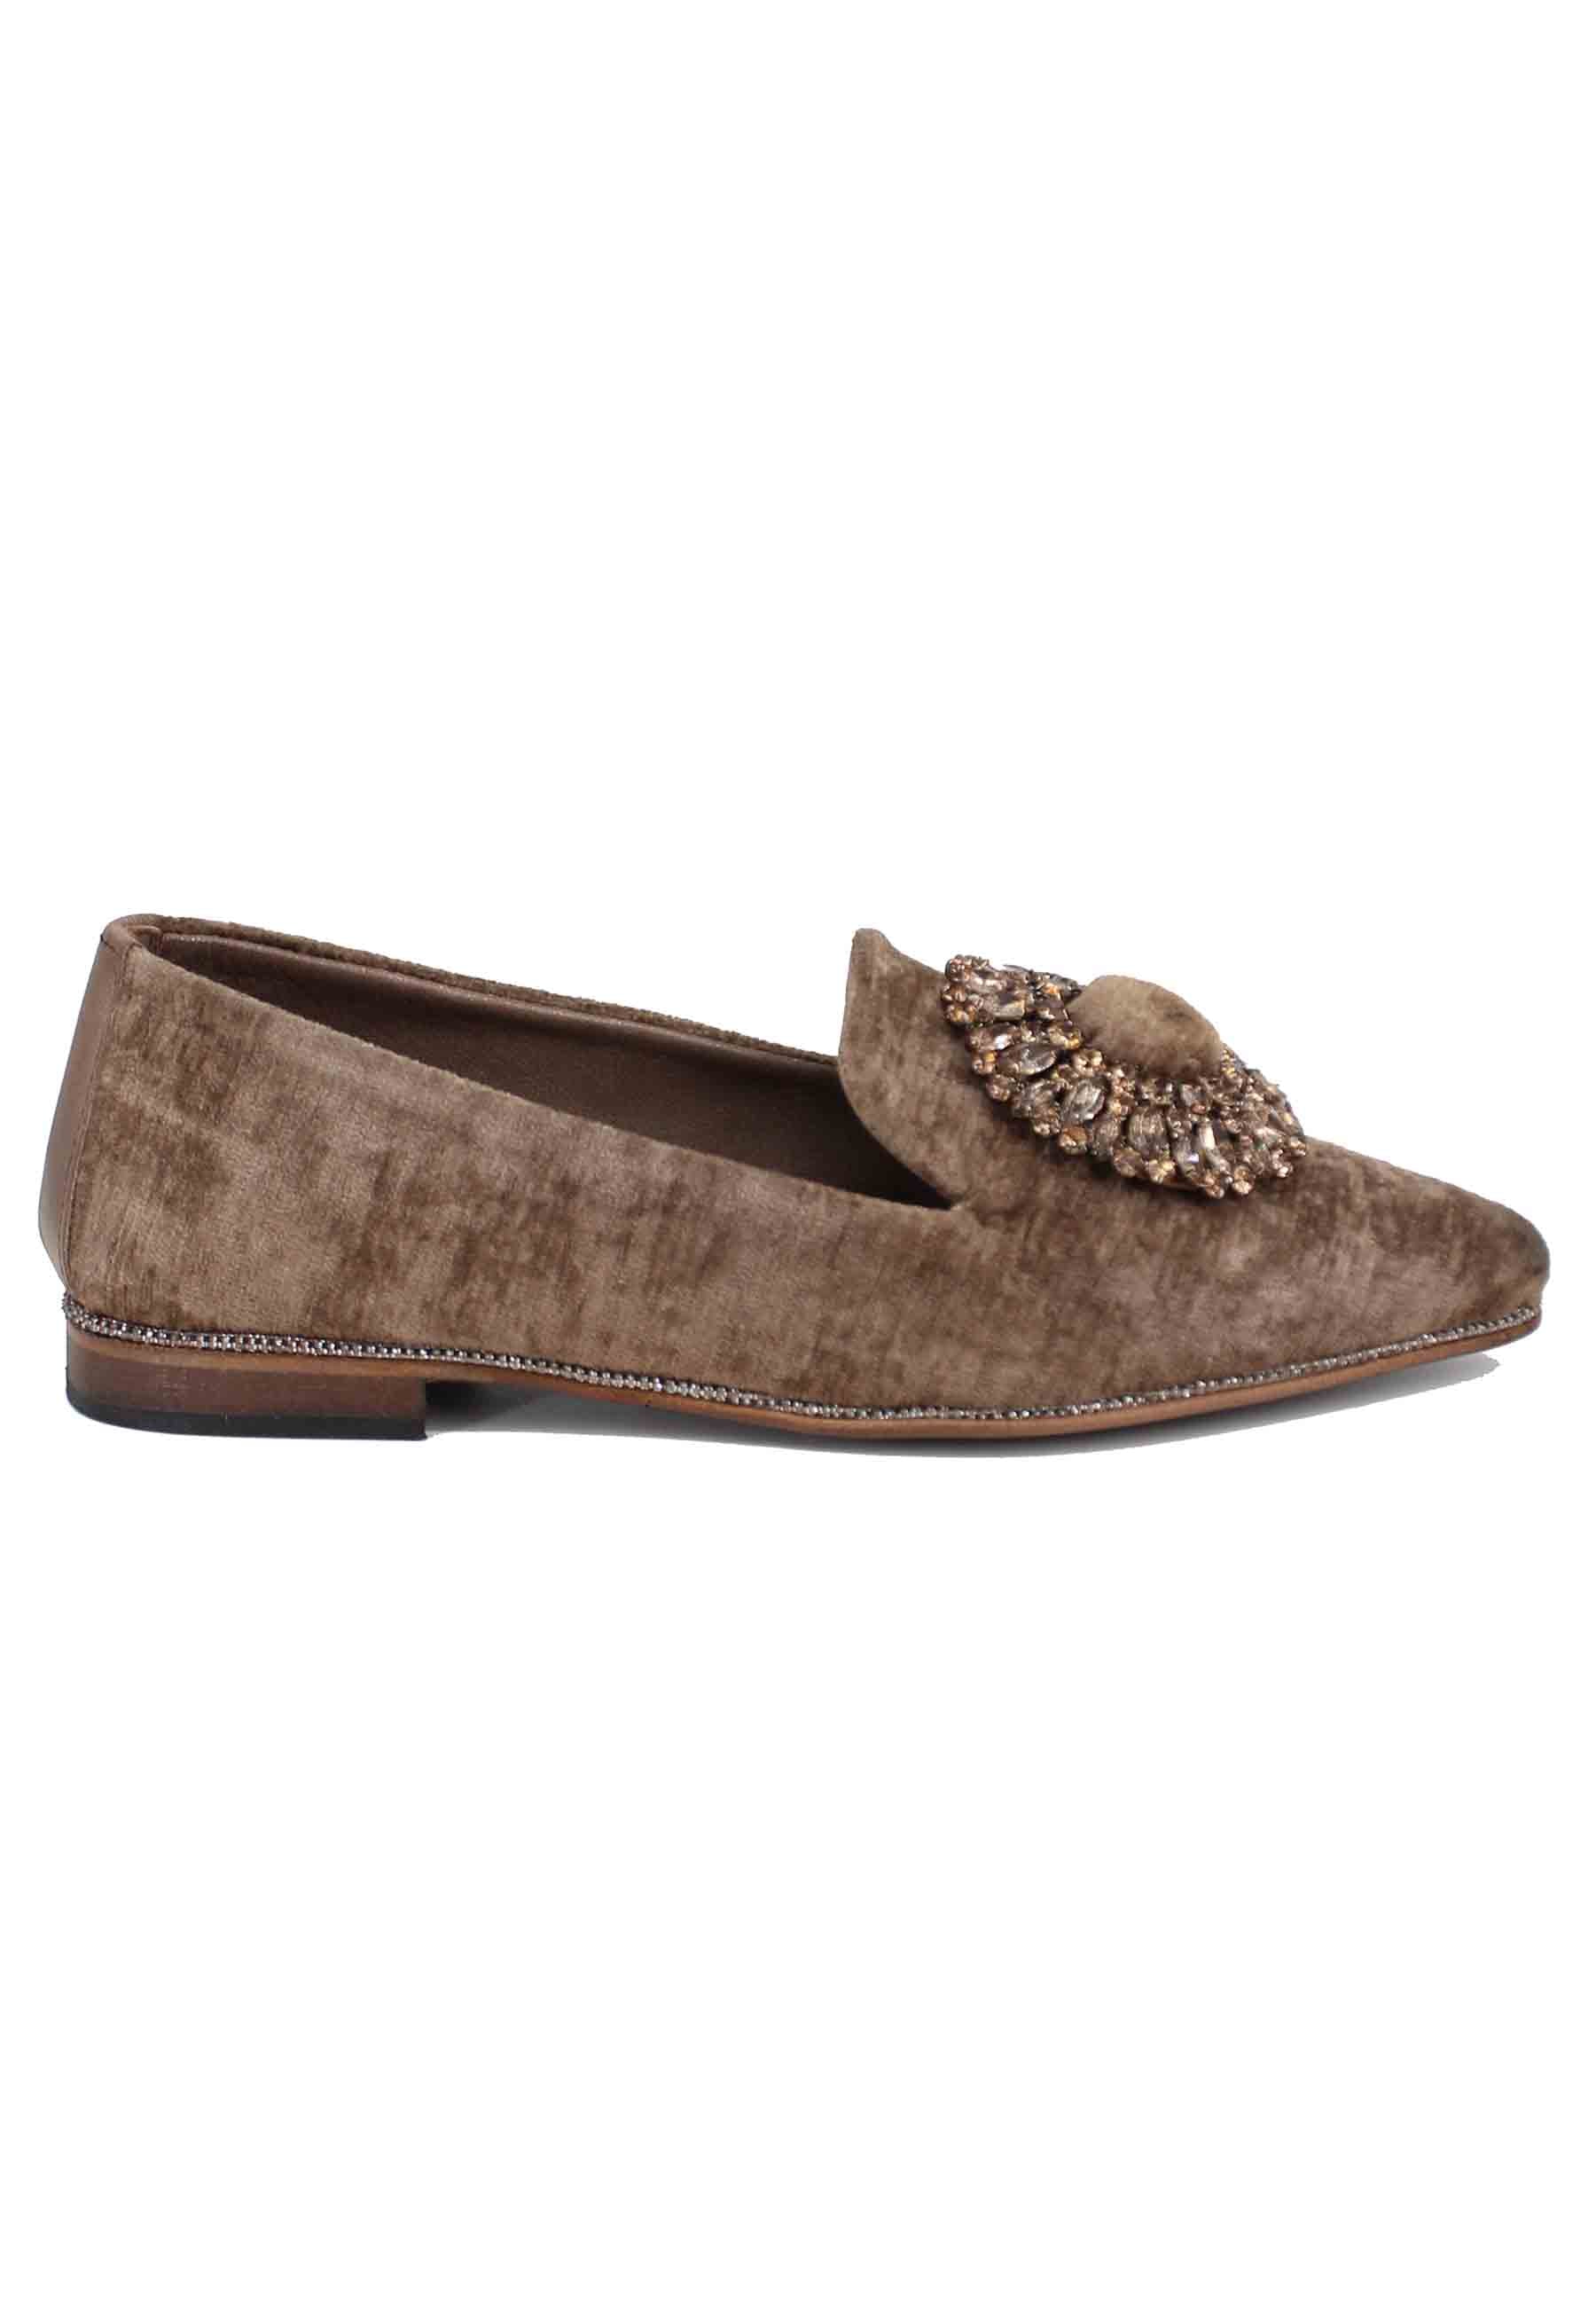 Women's moccasins in taupe velvet with buckle and low heel